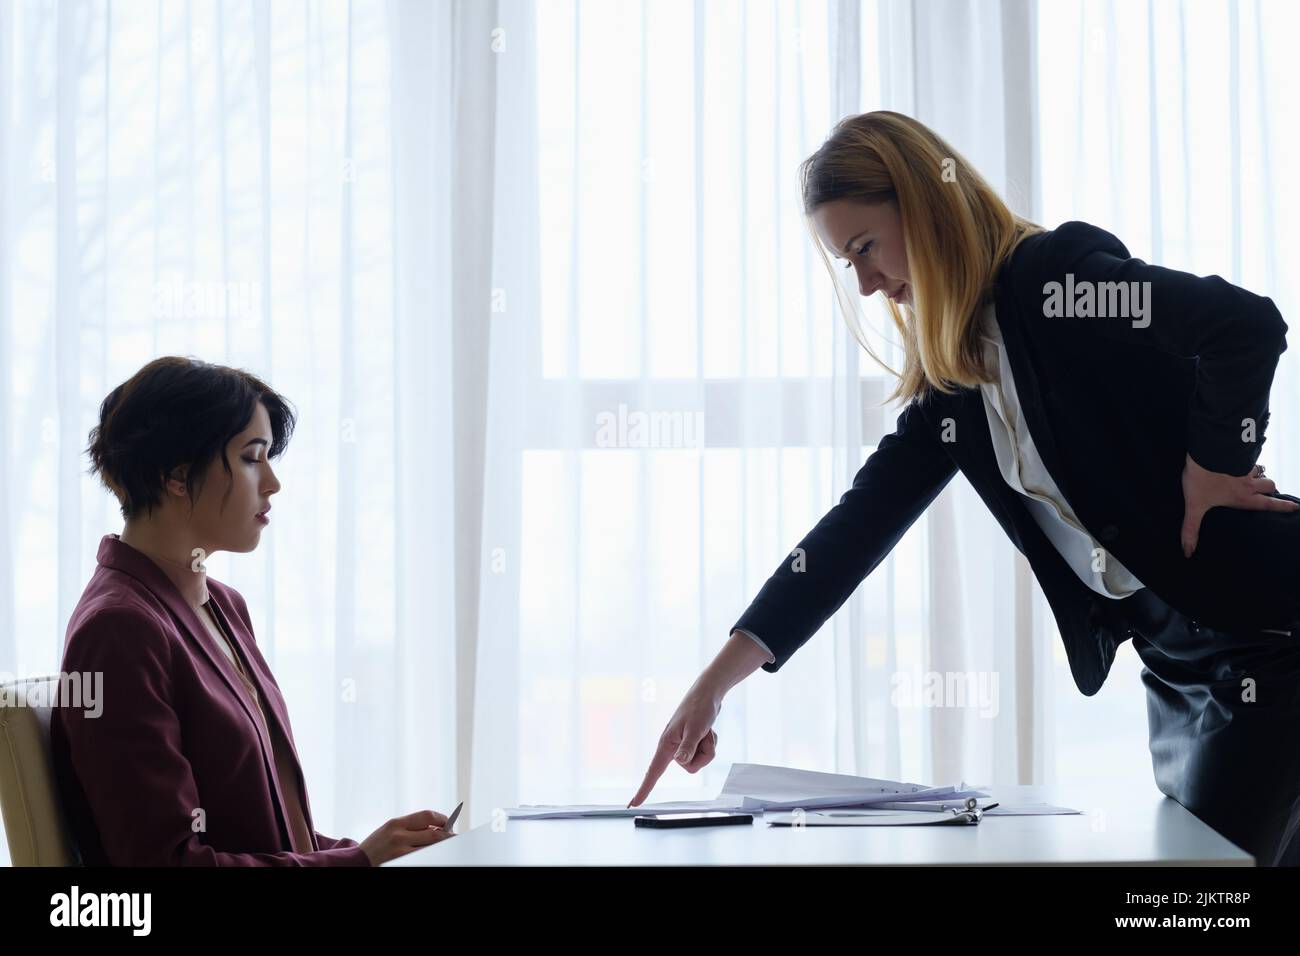 boss scold employee business woman reproof Stock Photo